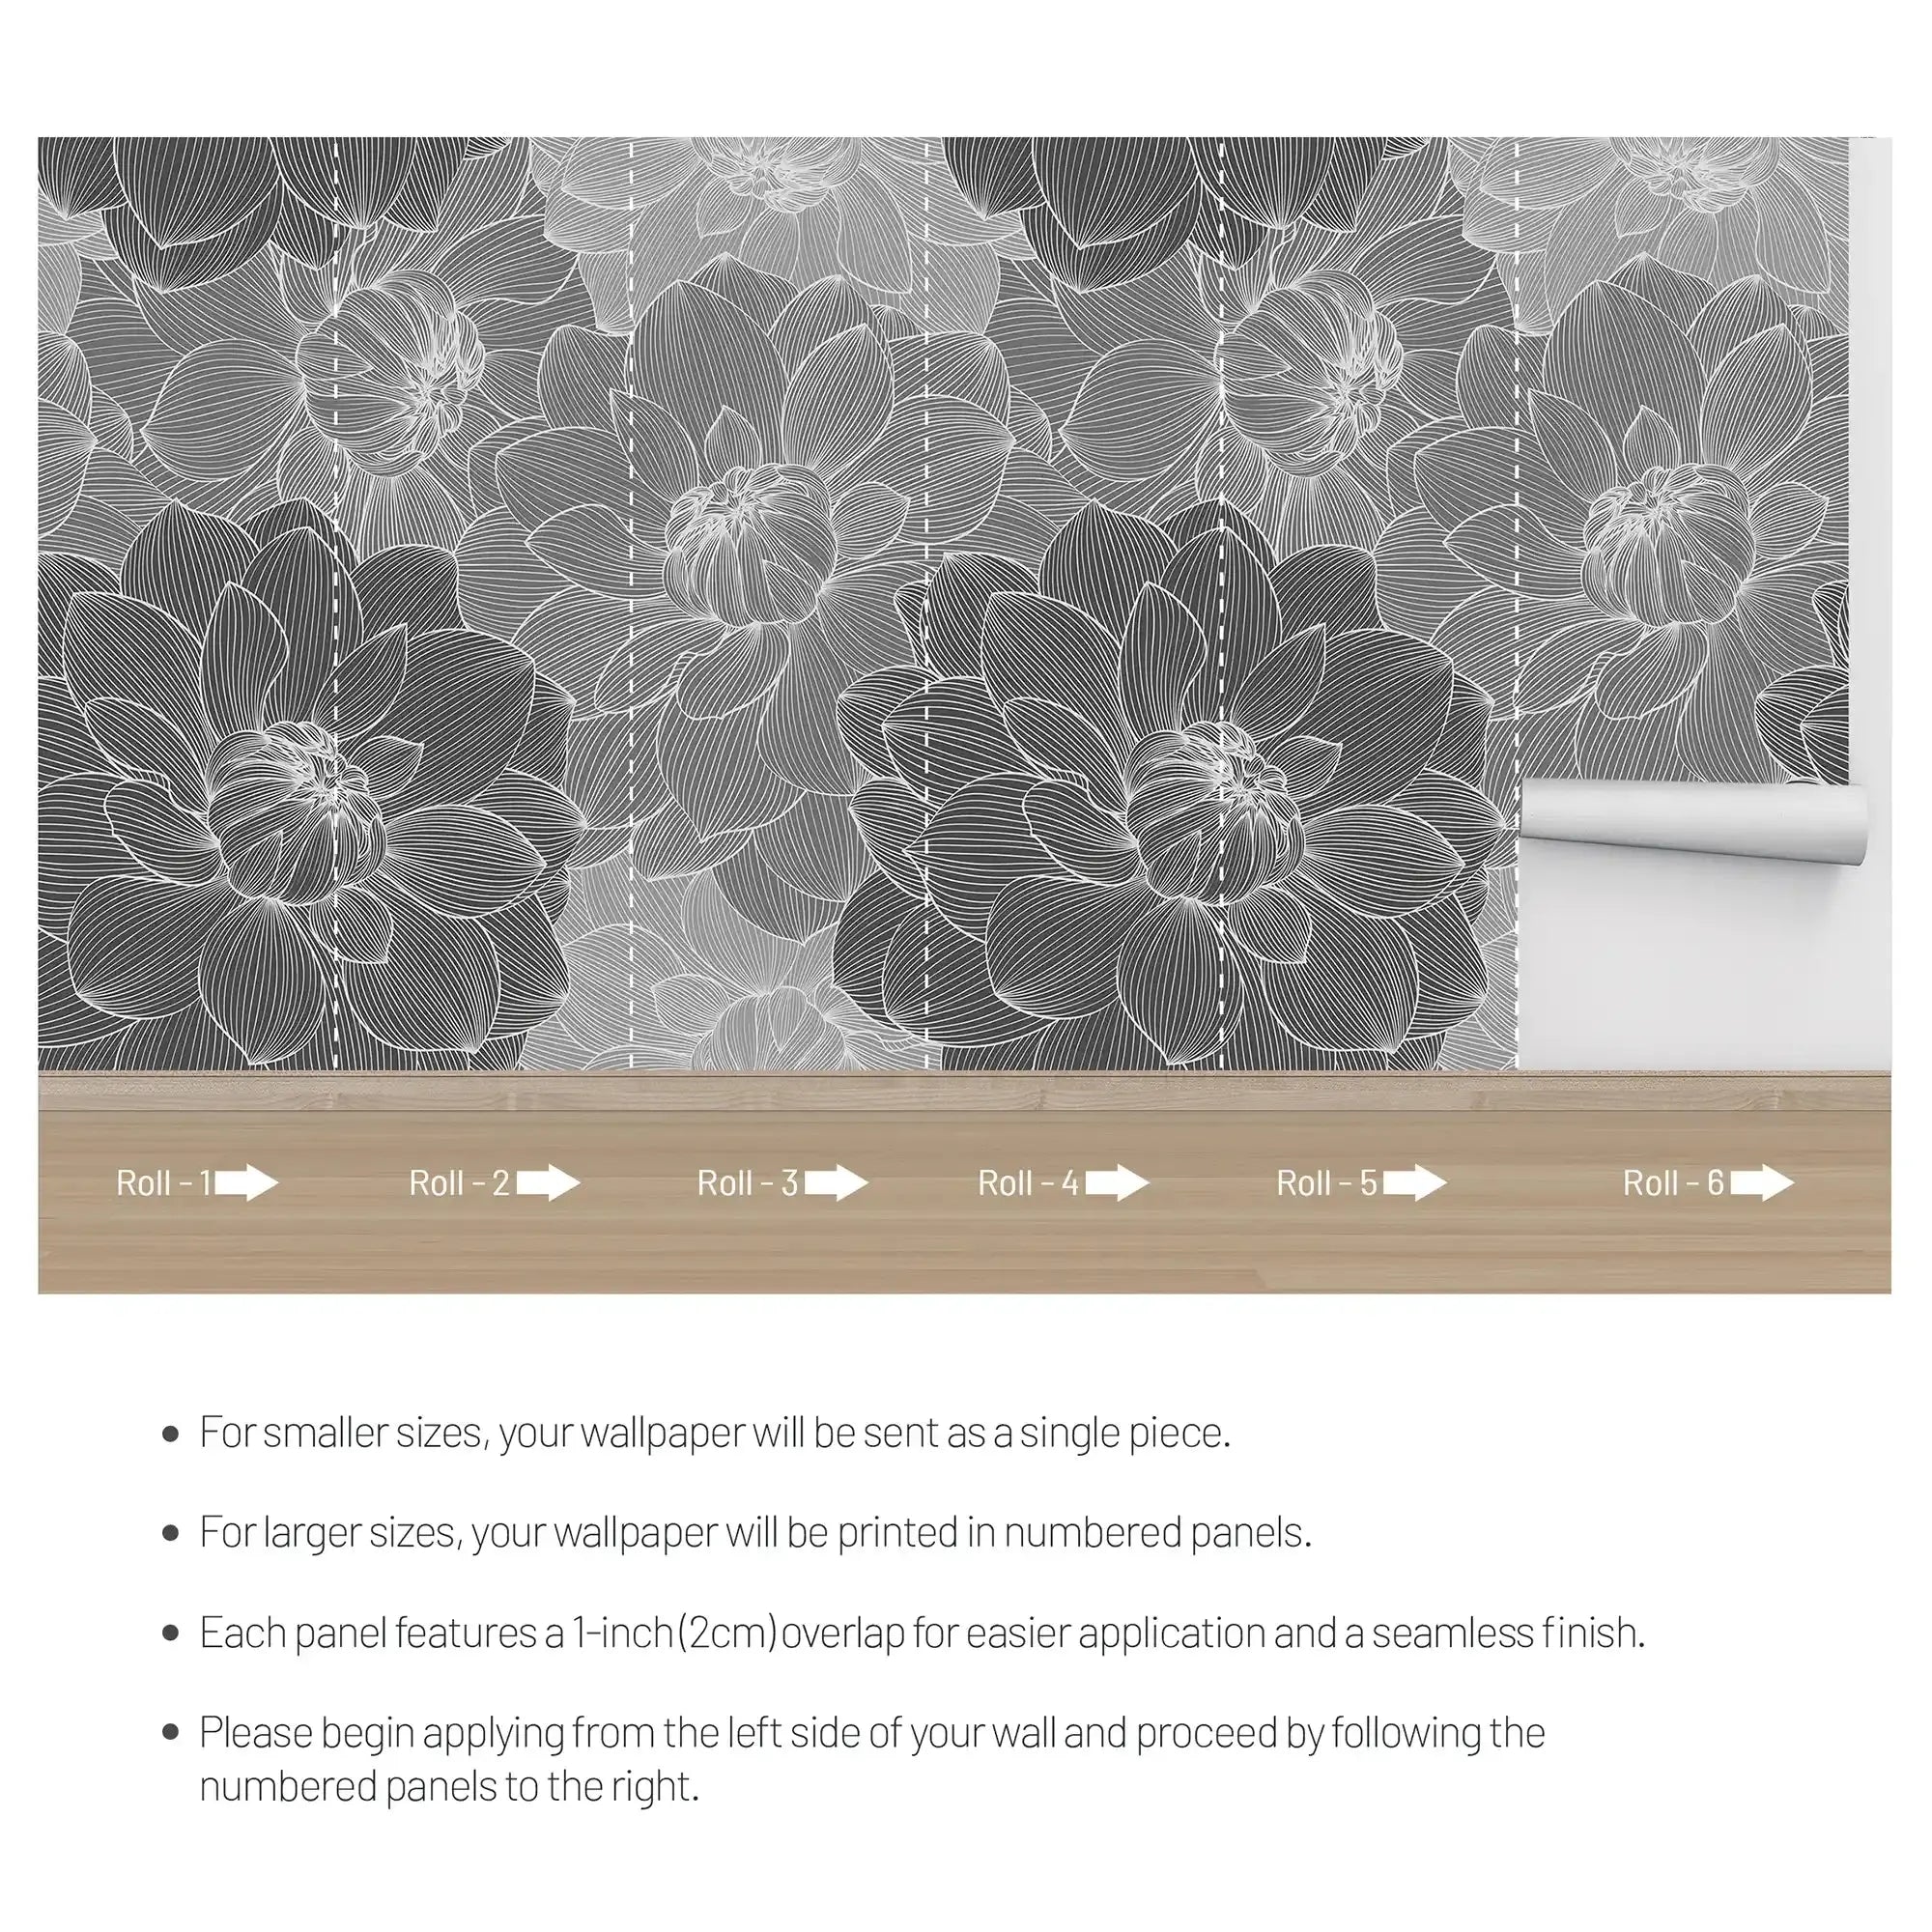 3090-F / Trendy Geometric Floral Self-Adhesive Wallpaper: Transform Your Walls with Easy Install - Artevella